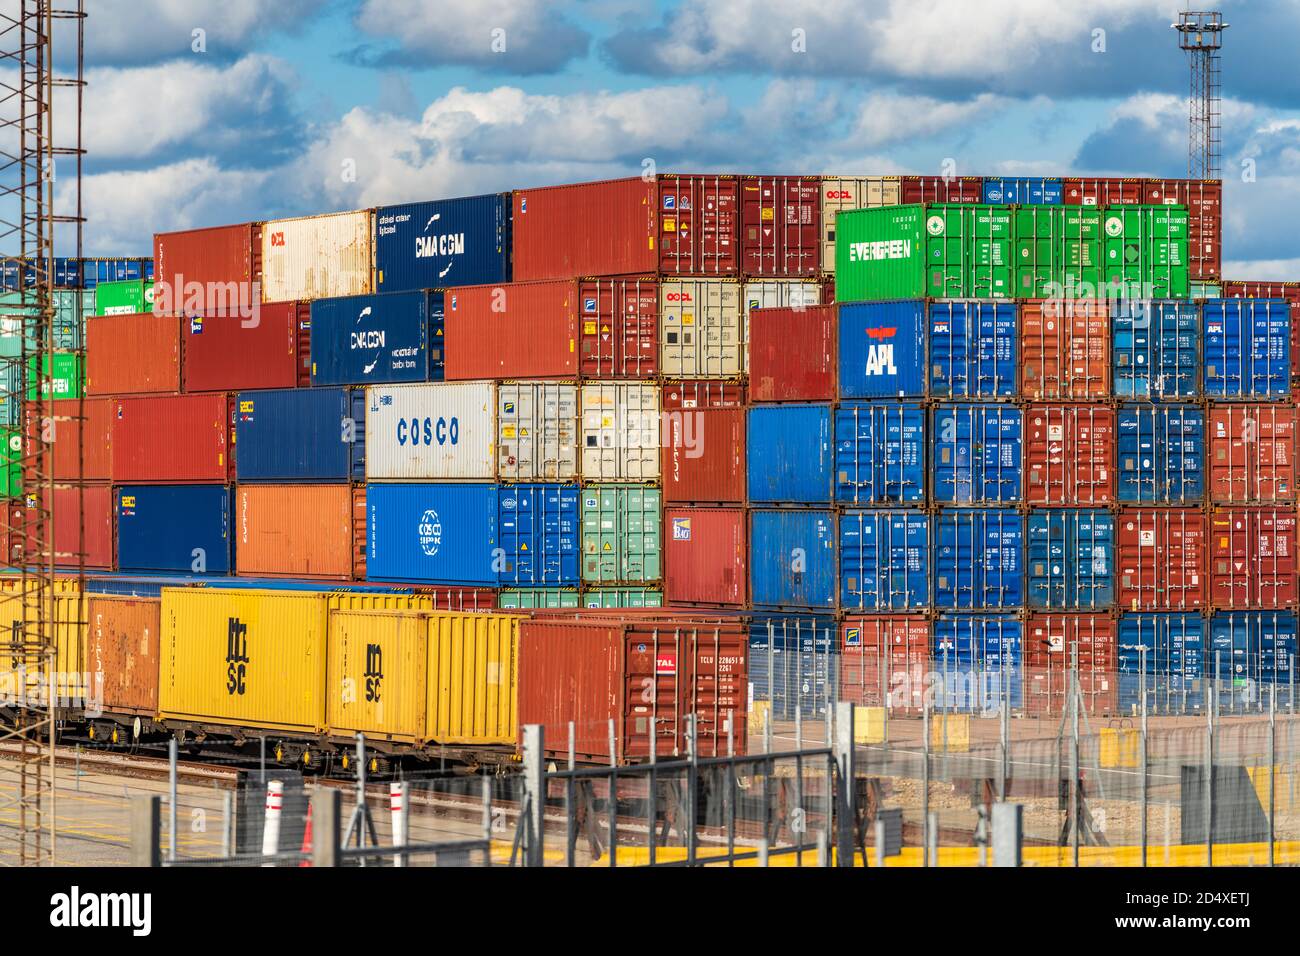 Felixstowe Port Rail Freight UK - Intermodal Containers being loaded onto freight trains in Felixstowe Port, the UK's largest container port. Stock Photo